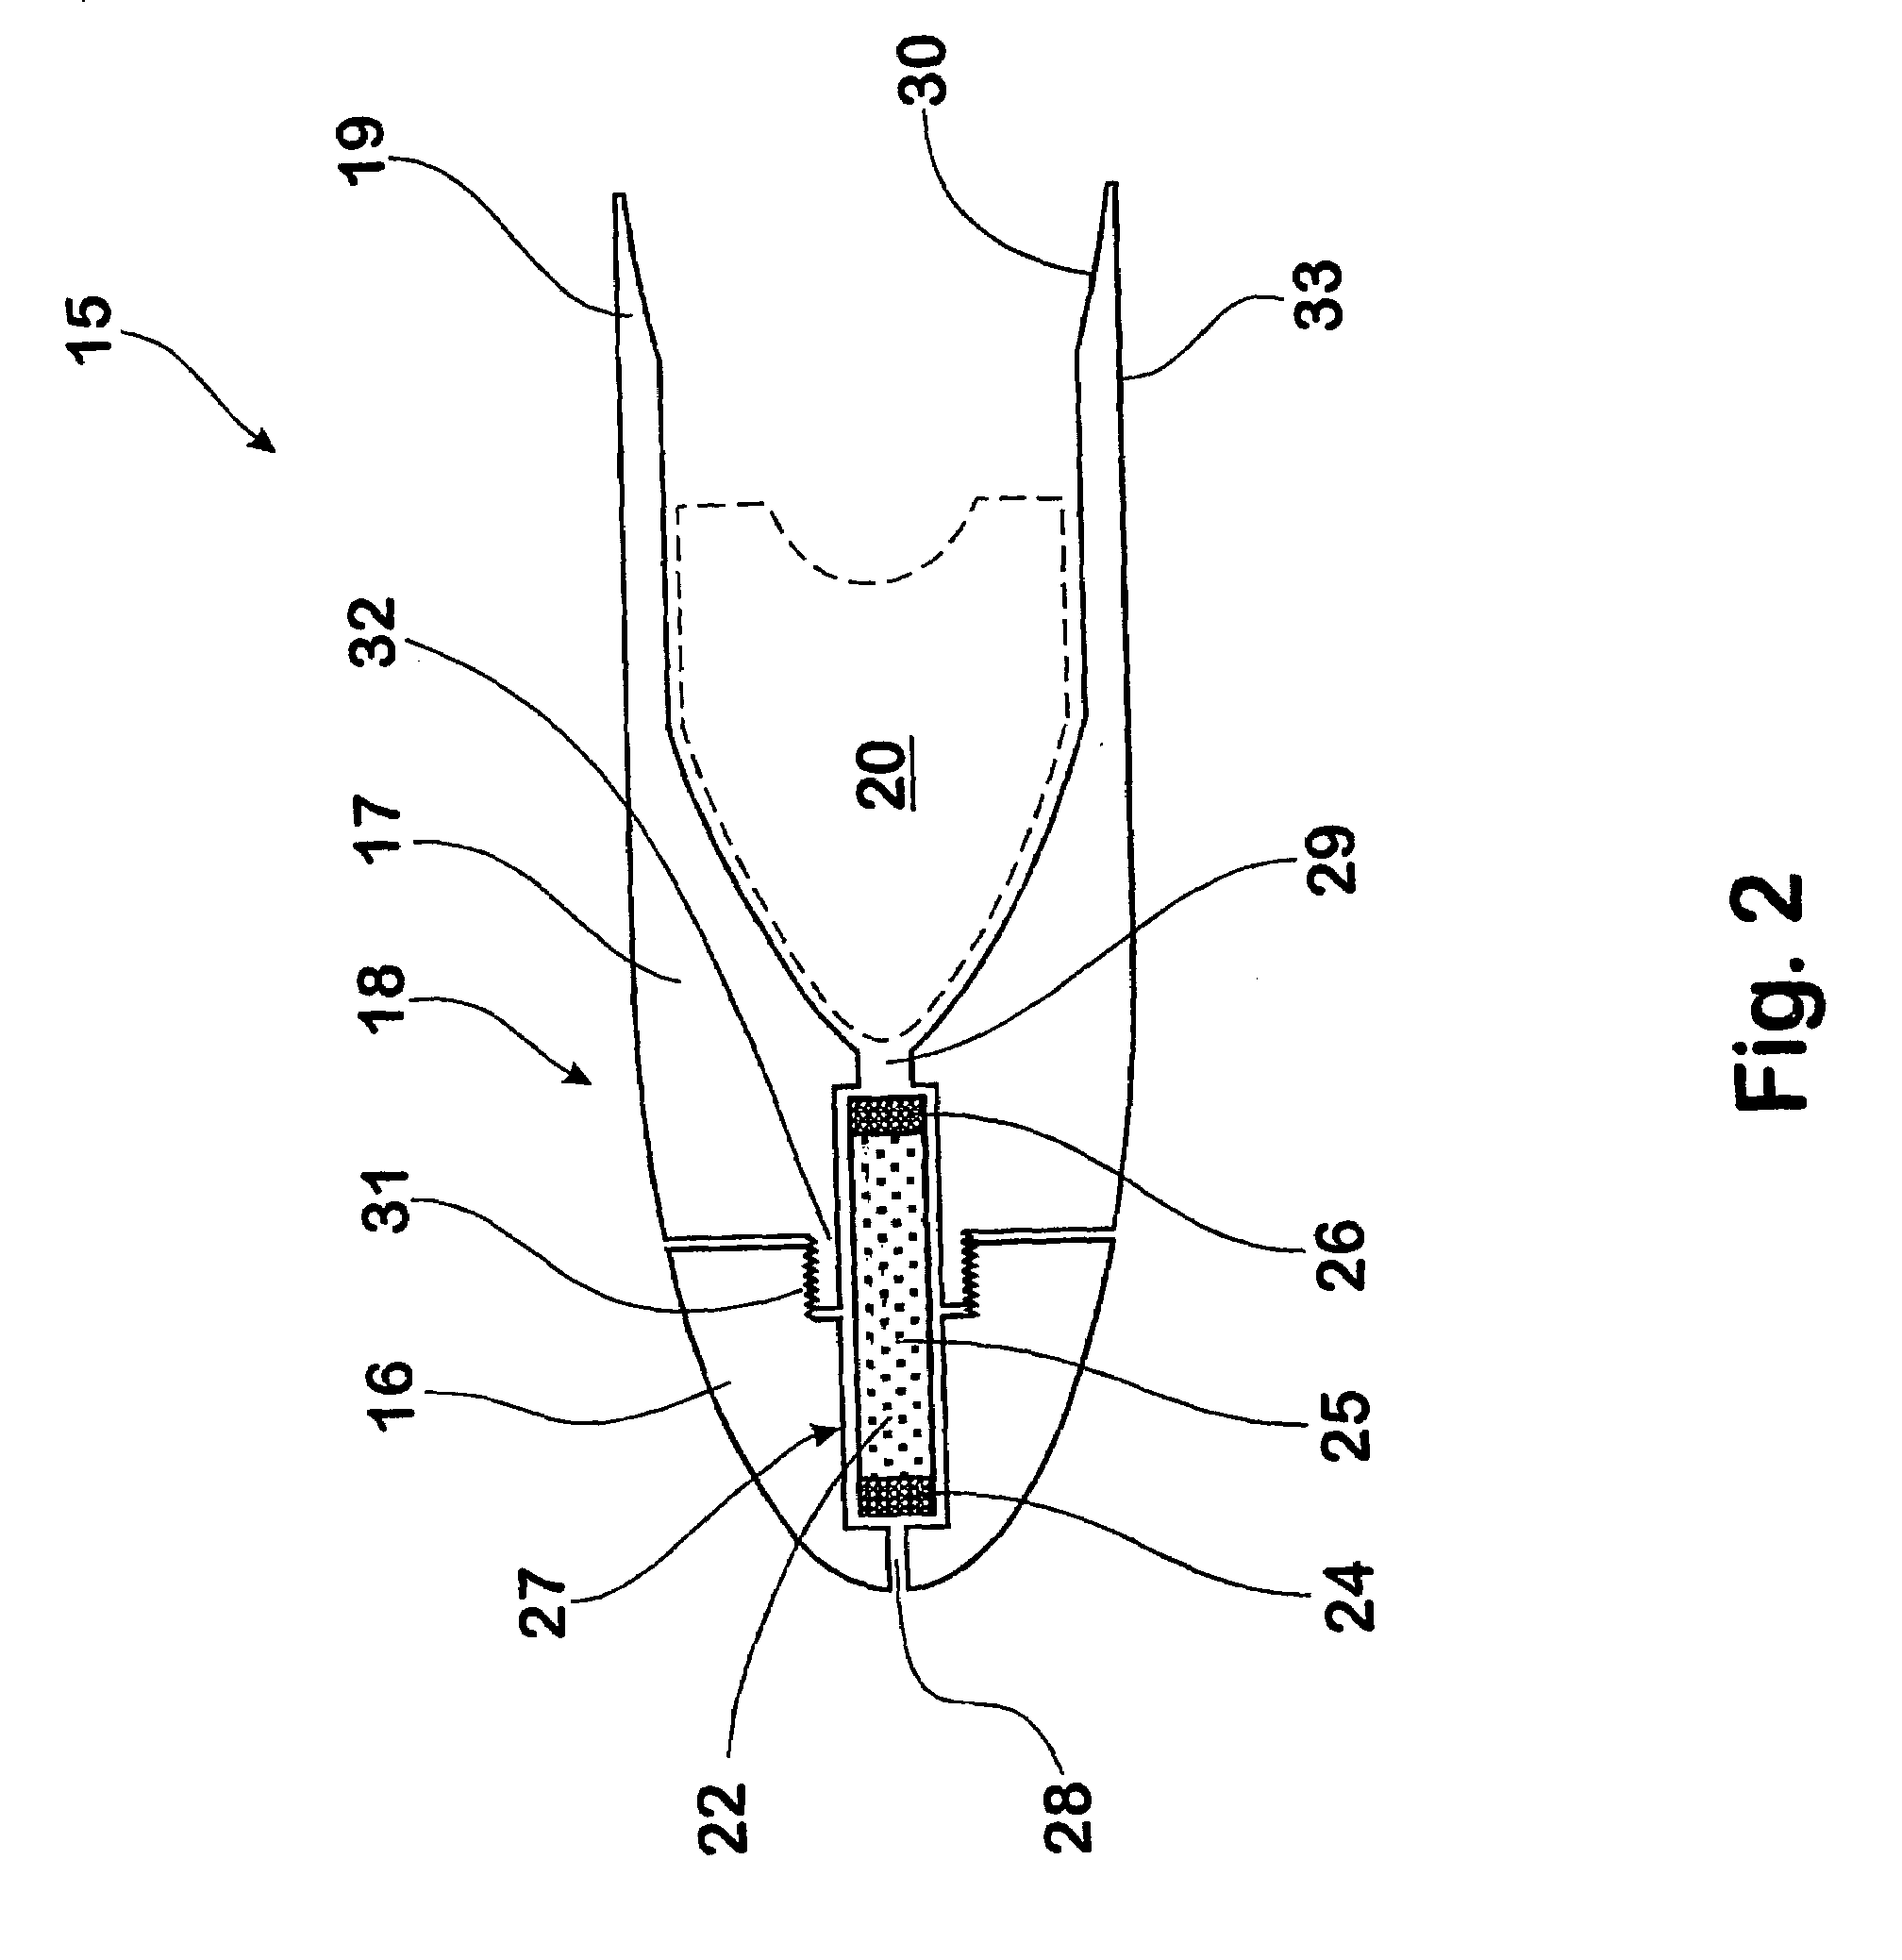 Ignition arrangement for stacked projectiles